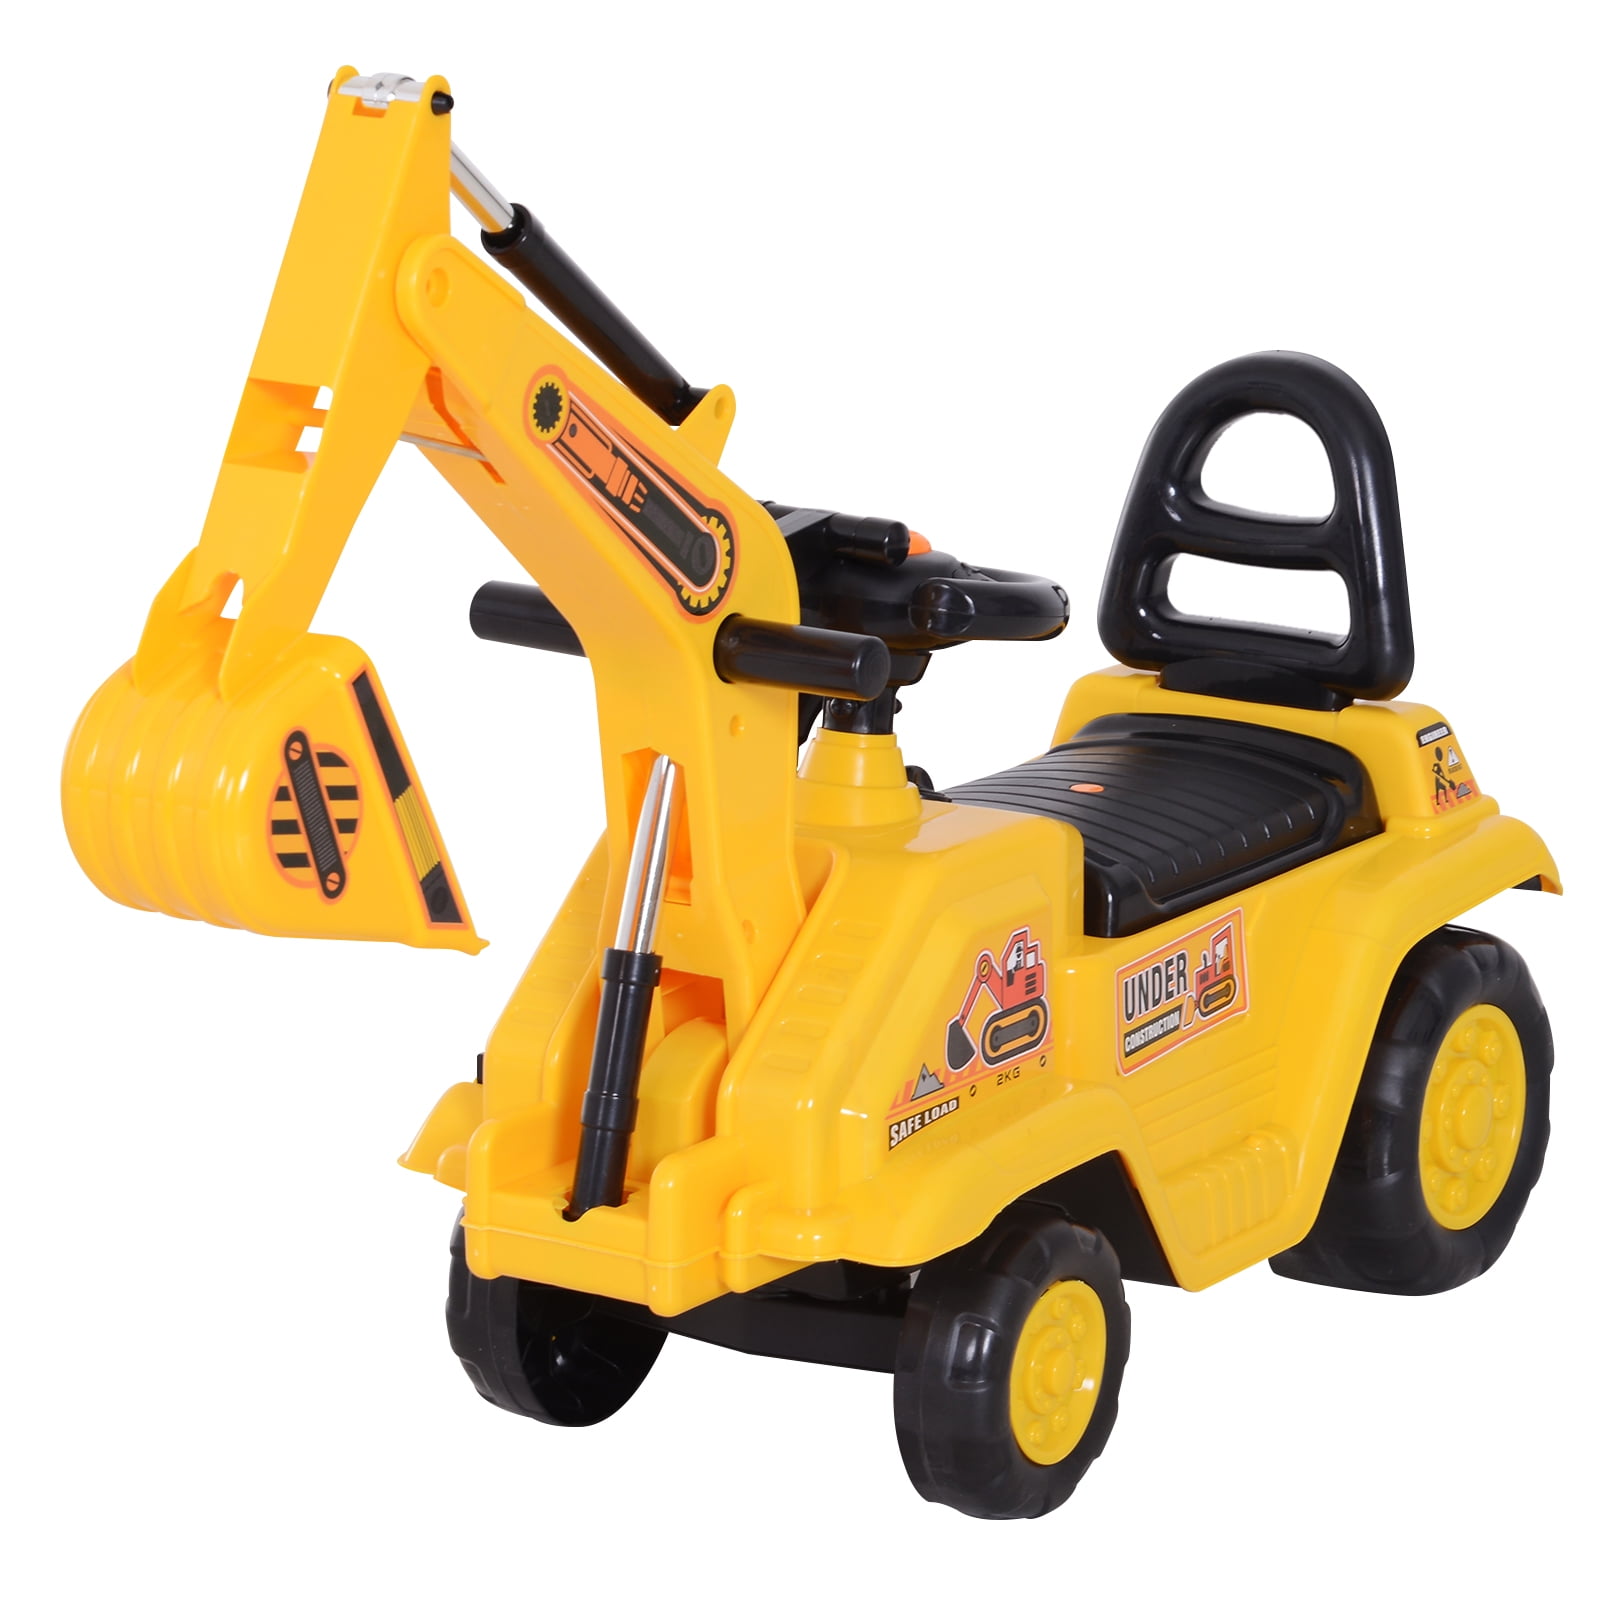 Details about   Kids Ride On Excavator Digger Tractor Truck Toy Scooter Pulling Cart w/ Helmet 